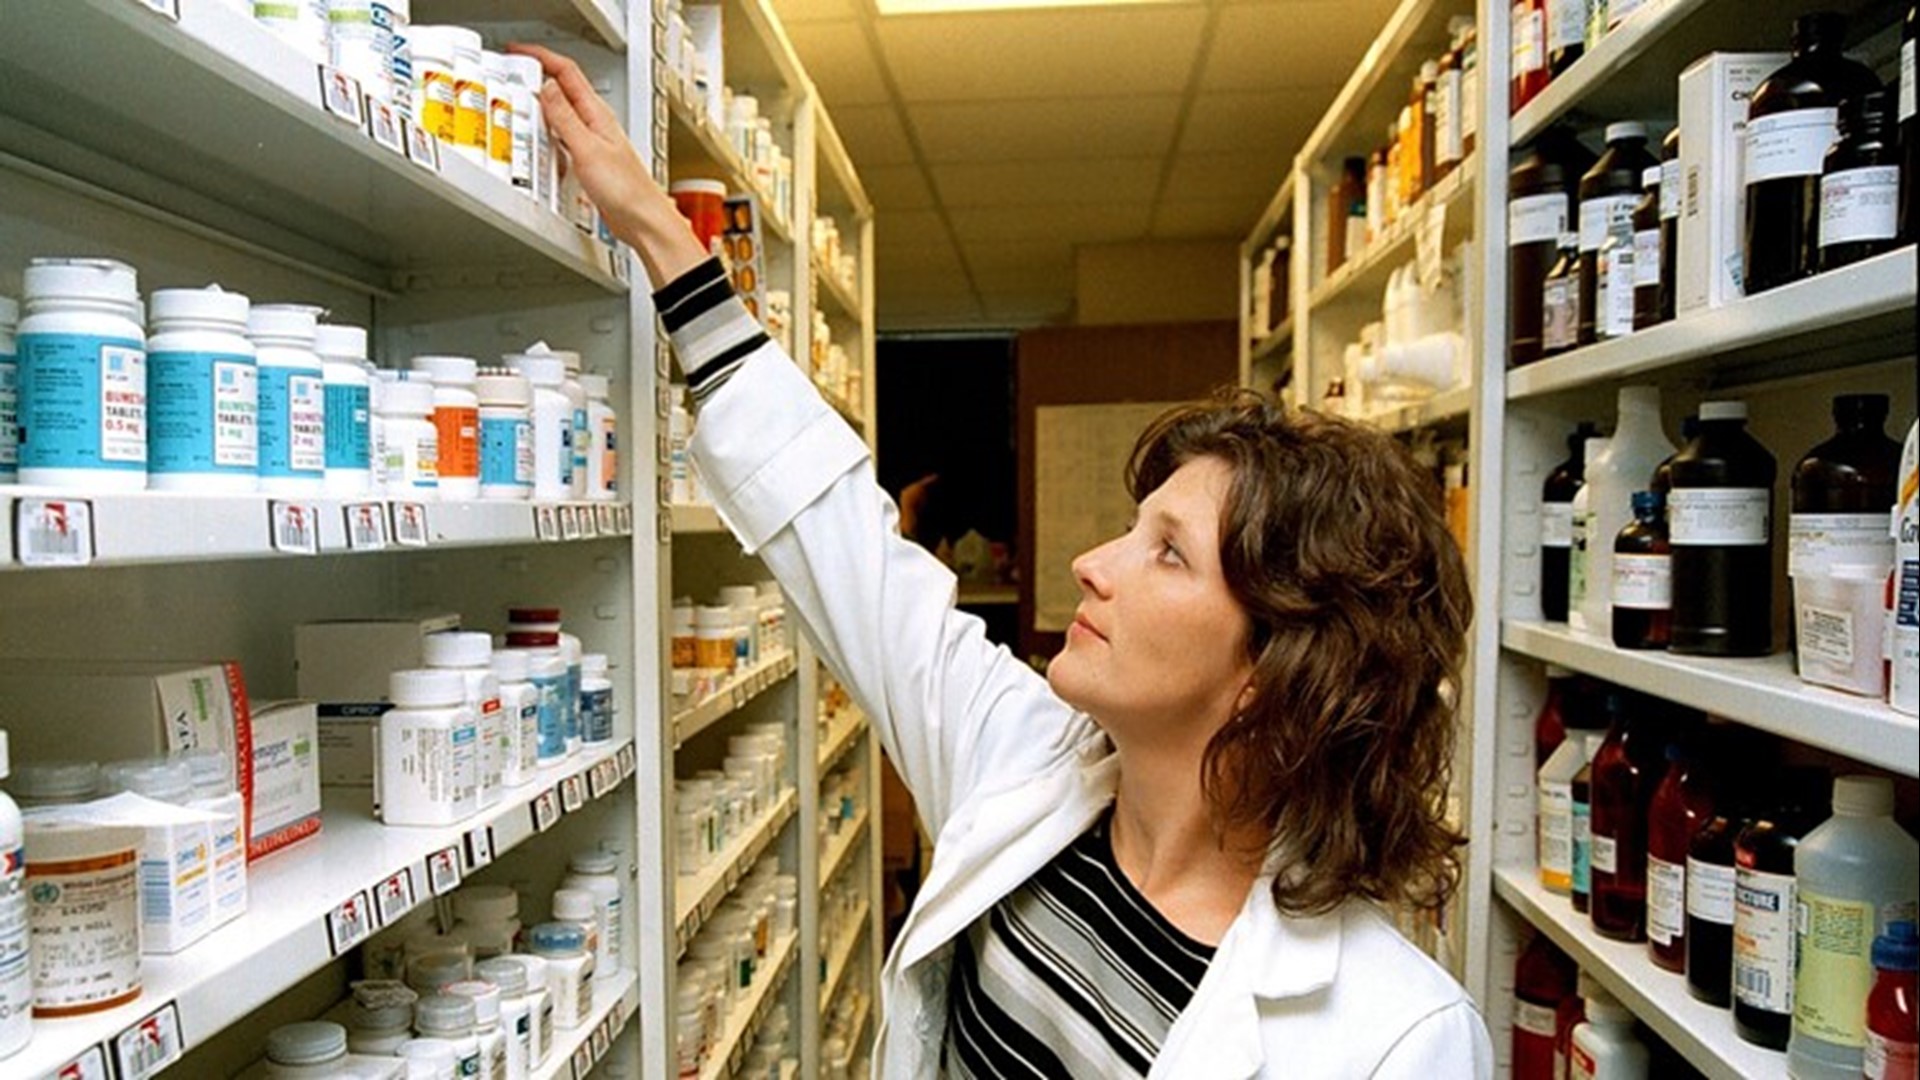 In recent months, many pharmacy technicians have quit, saying they’re being asked to do too much for too little pay.